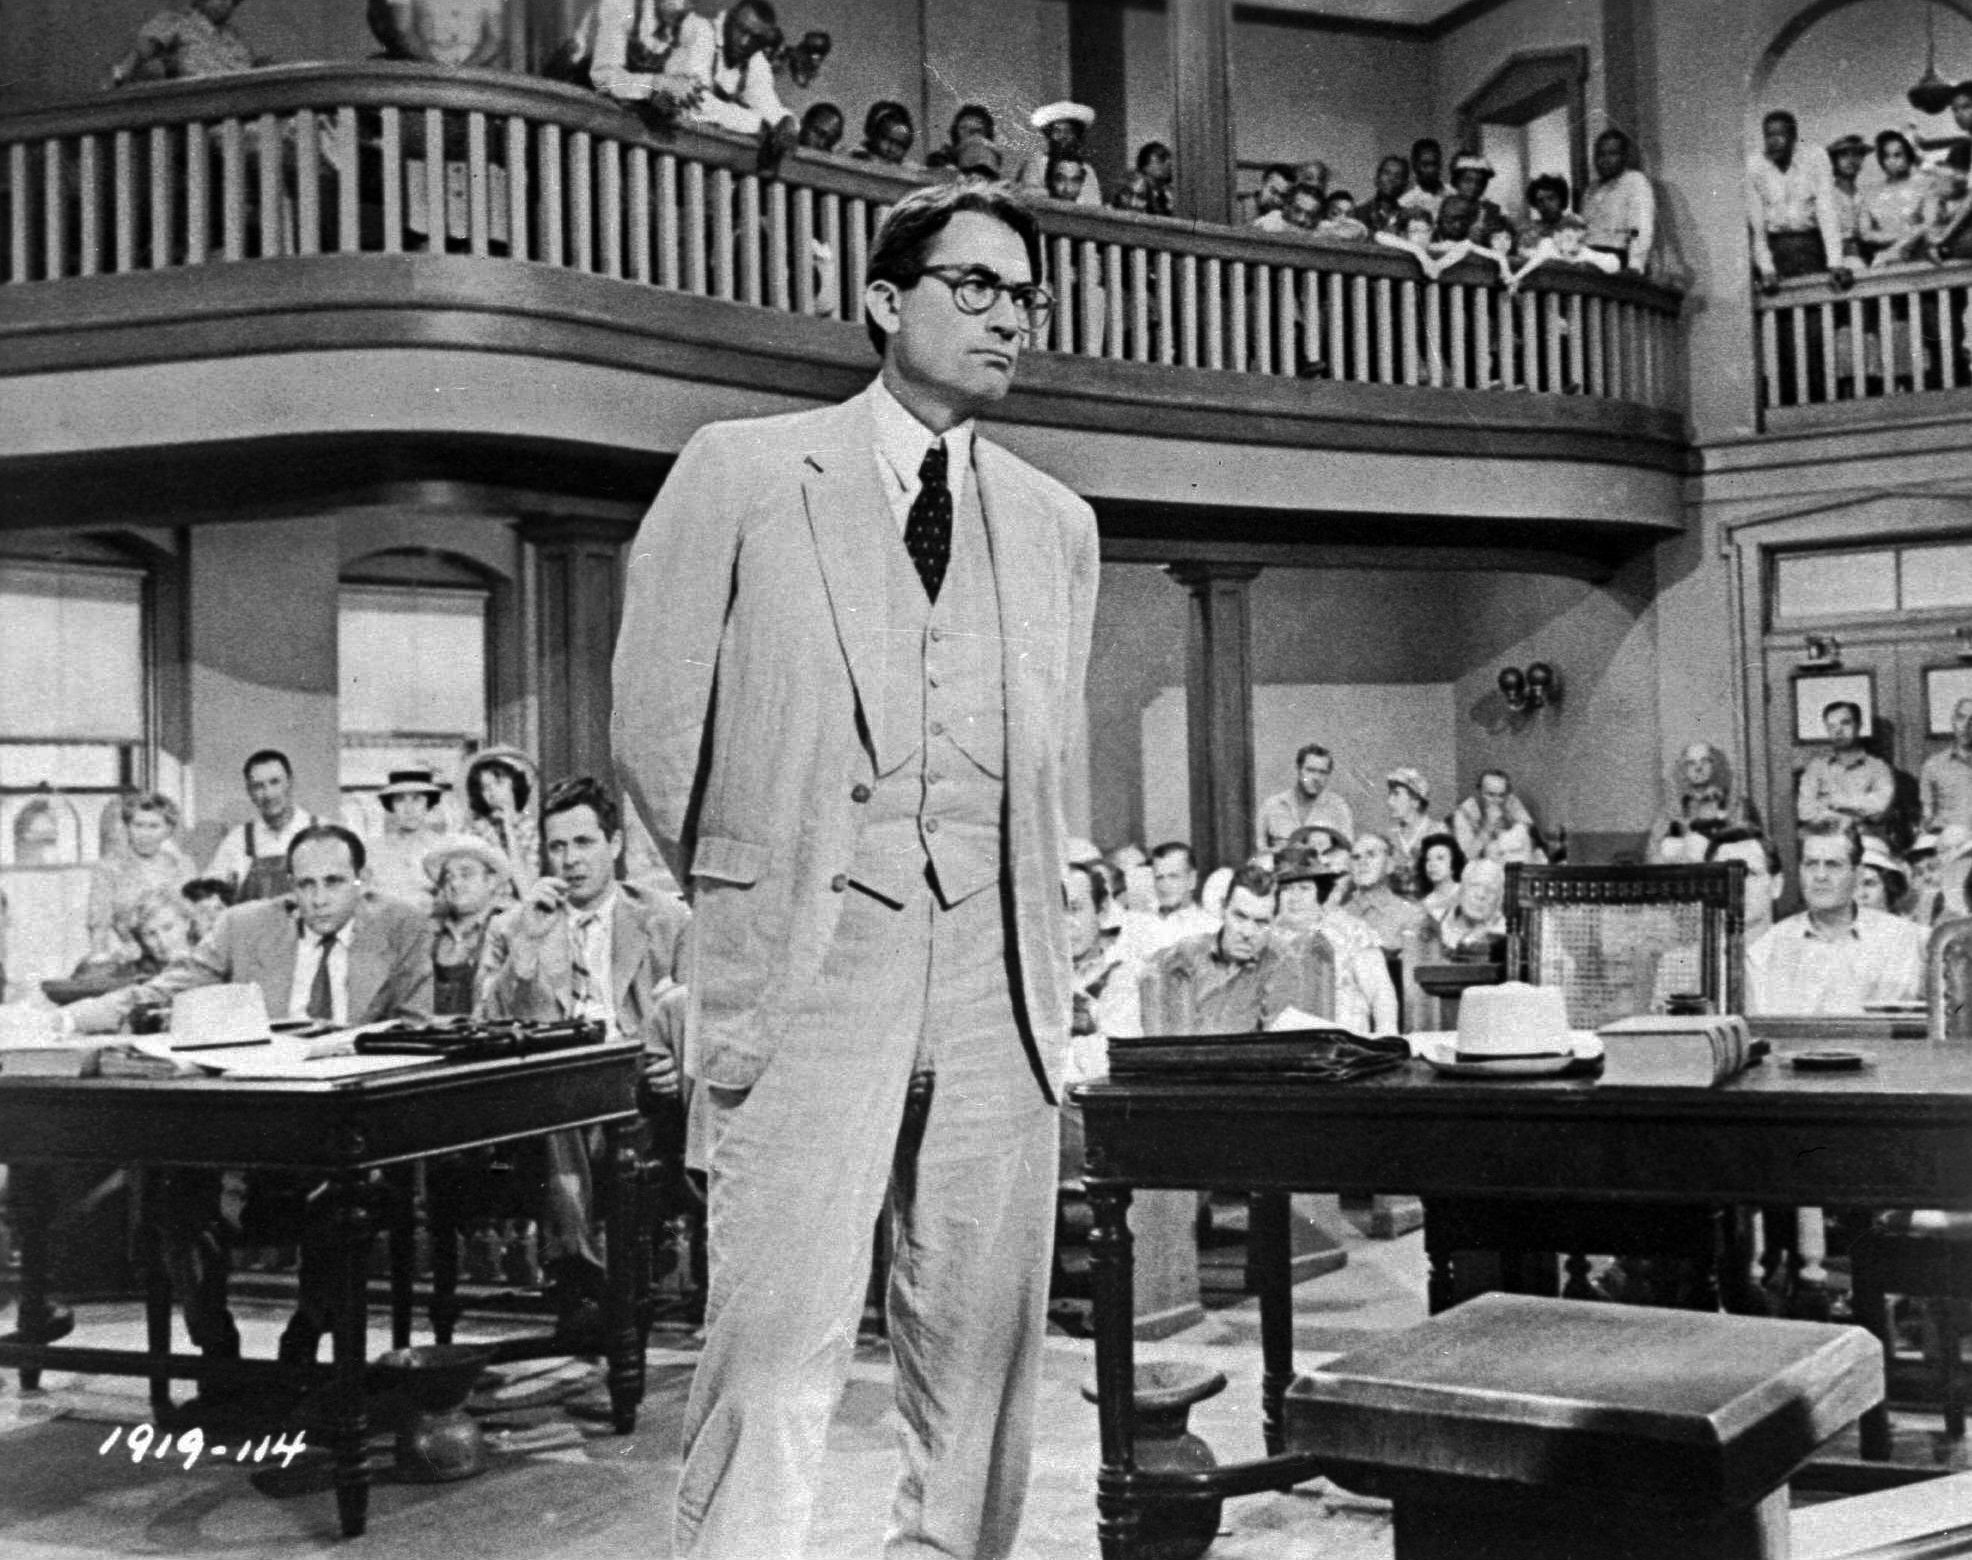 Gregory Peck as Atticus Finch in the film version of &quot;To Kill a Mockingbird&quot;